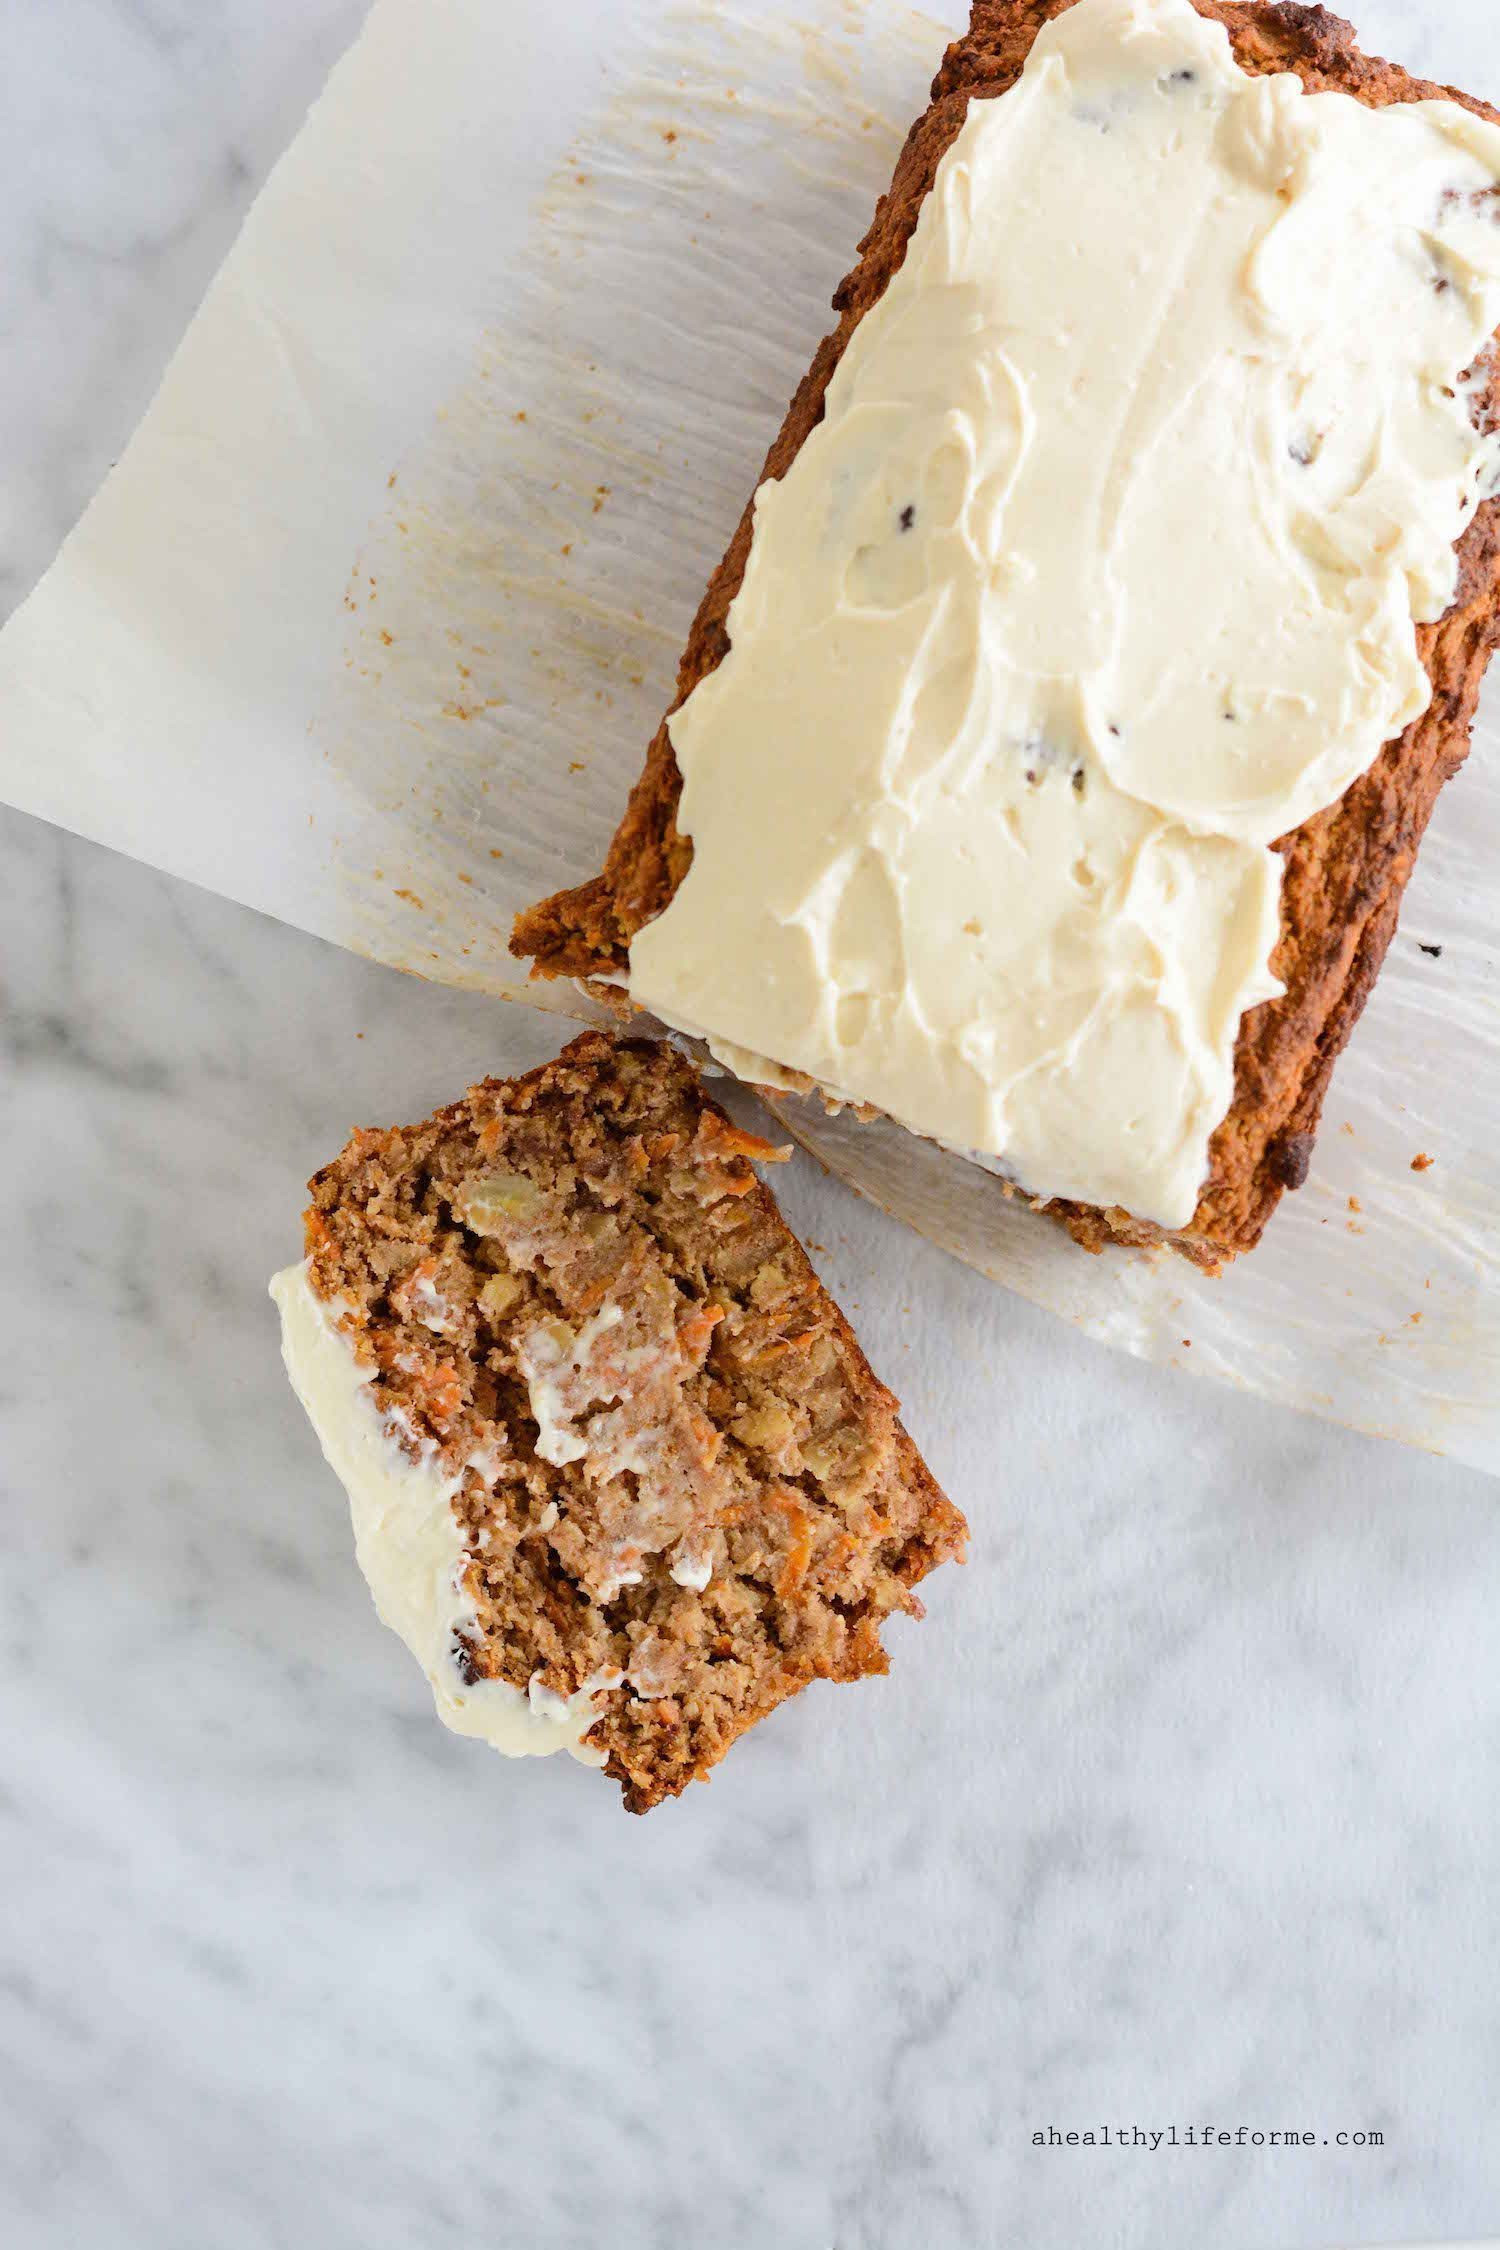 Dairy Free Carrot Cake Frosting
 Gluten Free Carrot Cake with Cream Cheese Frosting A